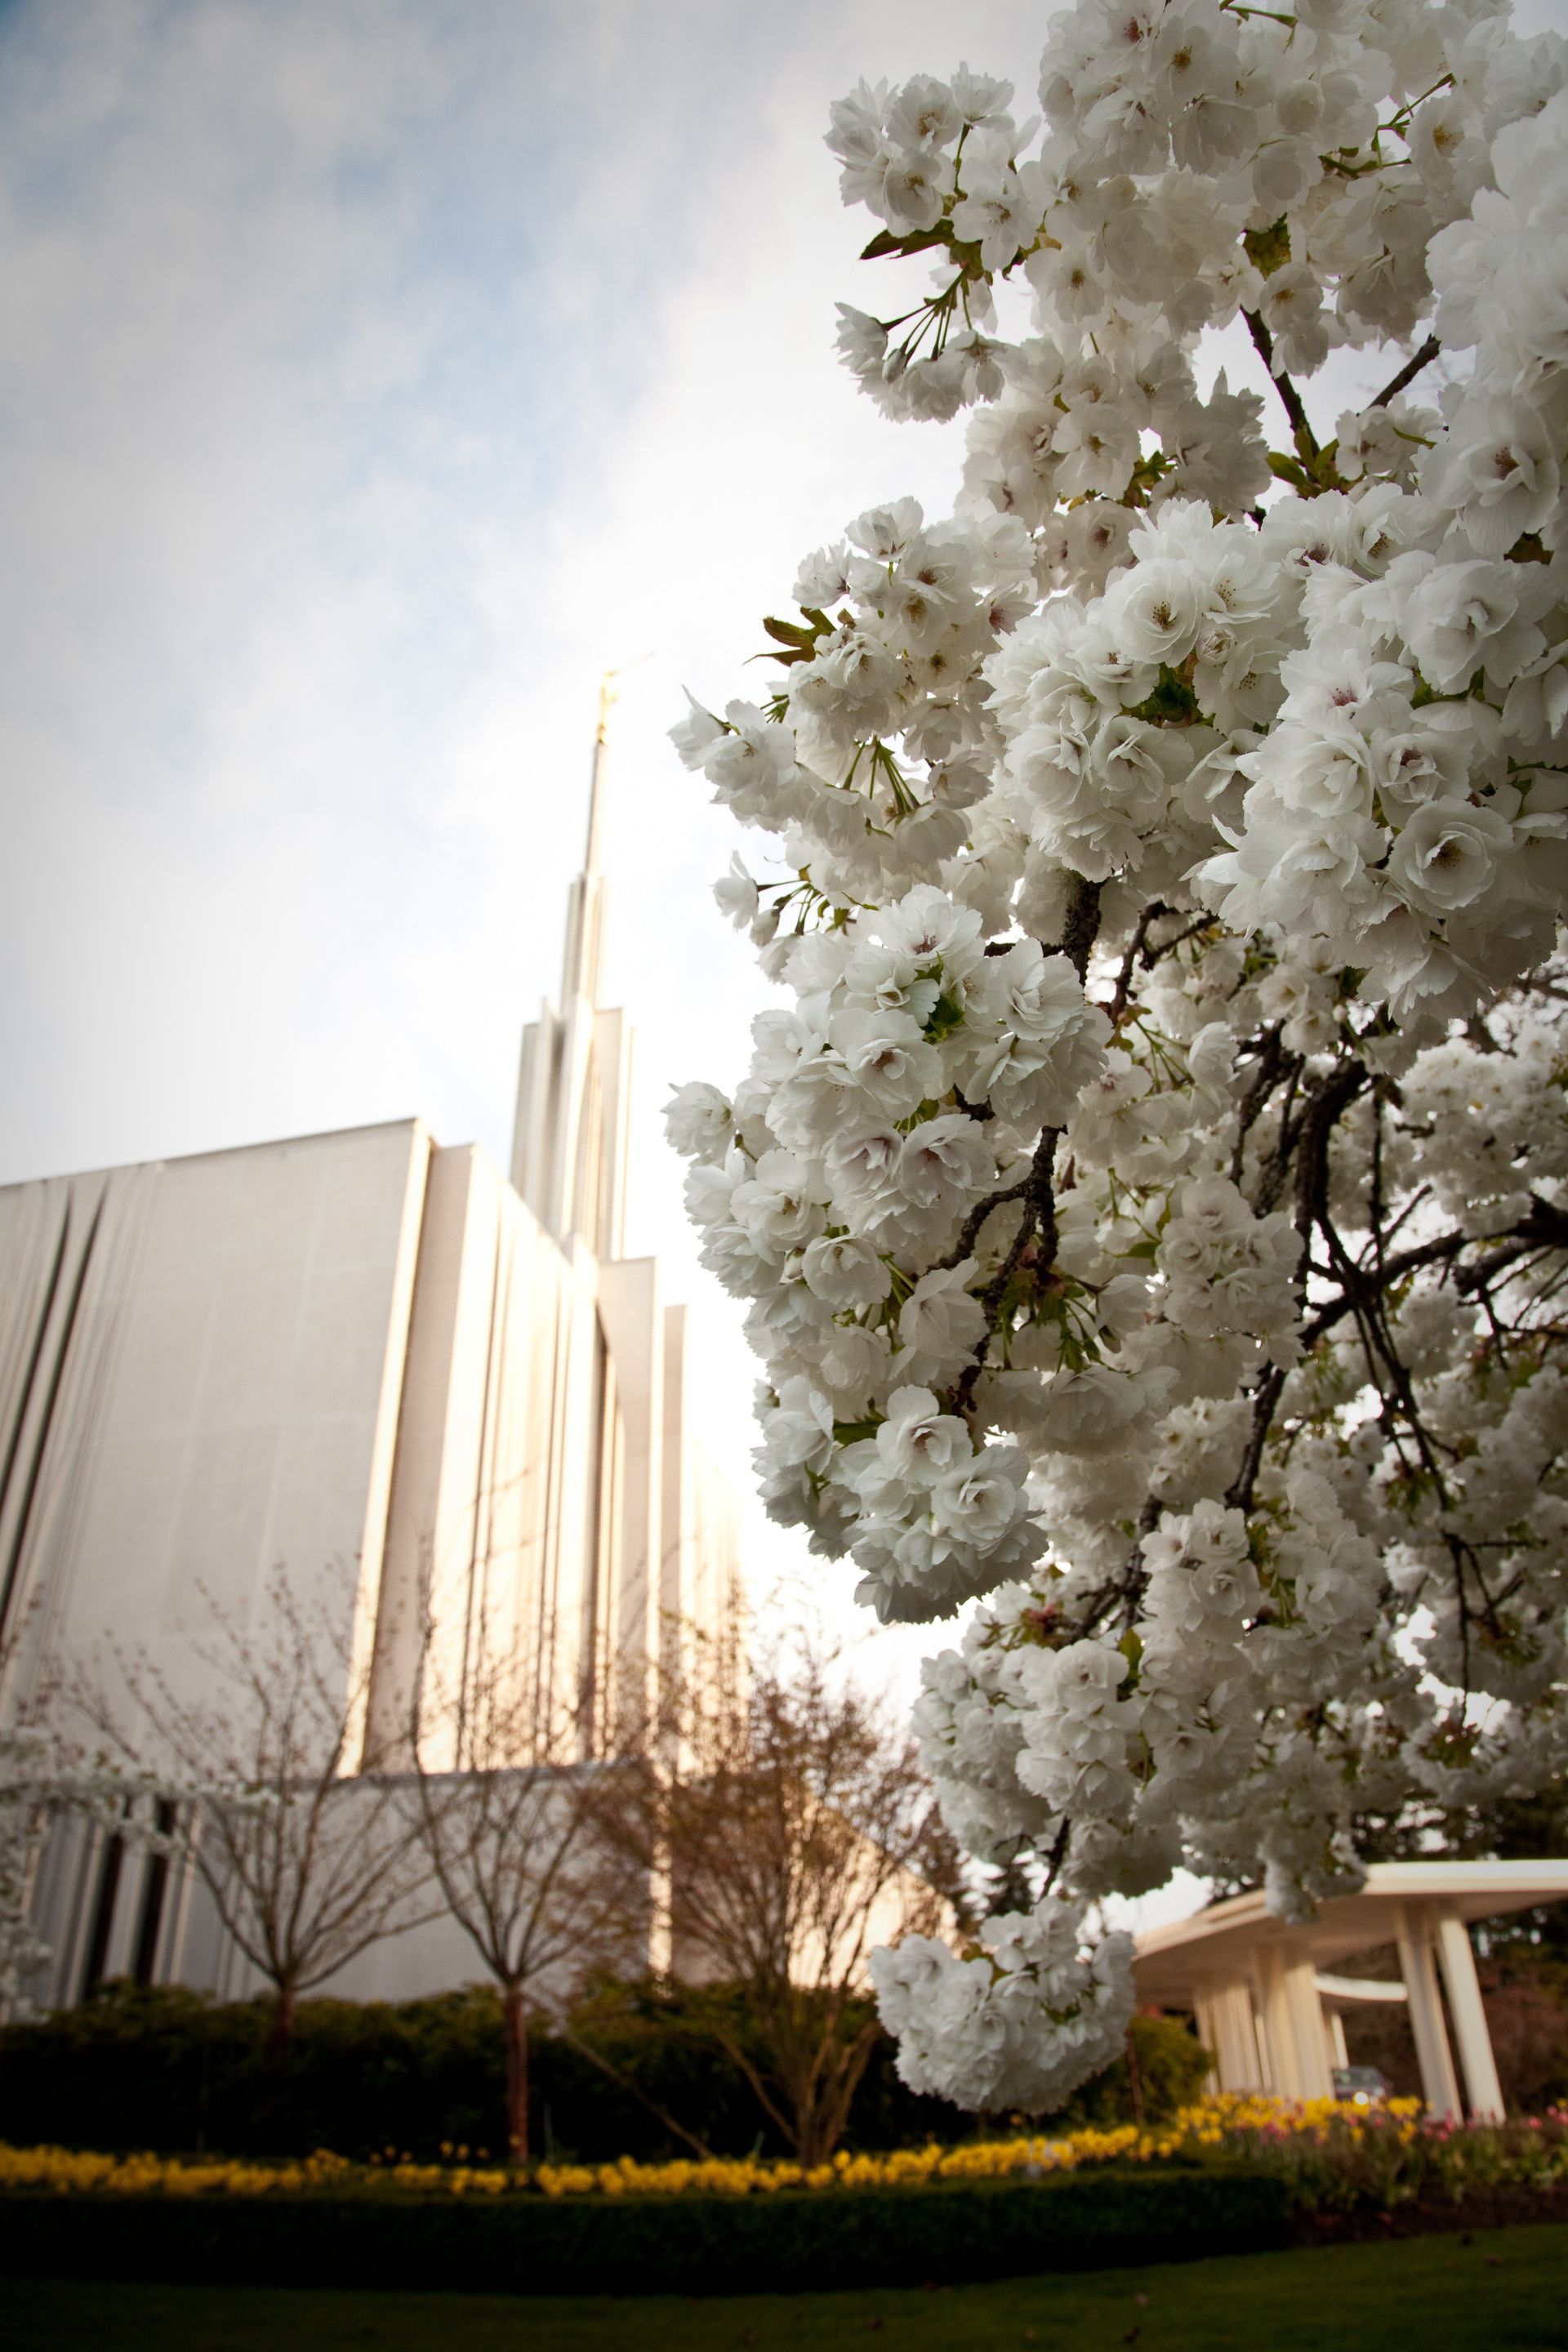 A side view of the Seattle Washington Temple in the spring, including the entrance and scenery.